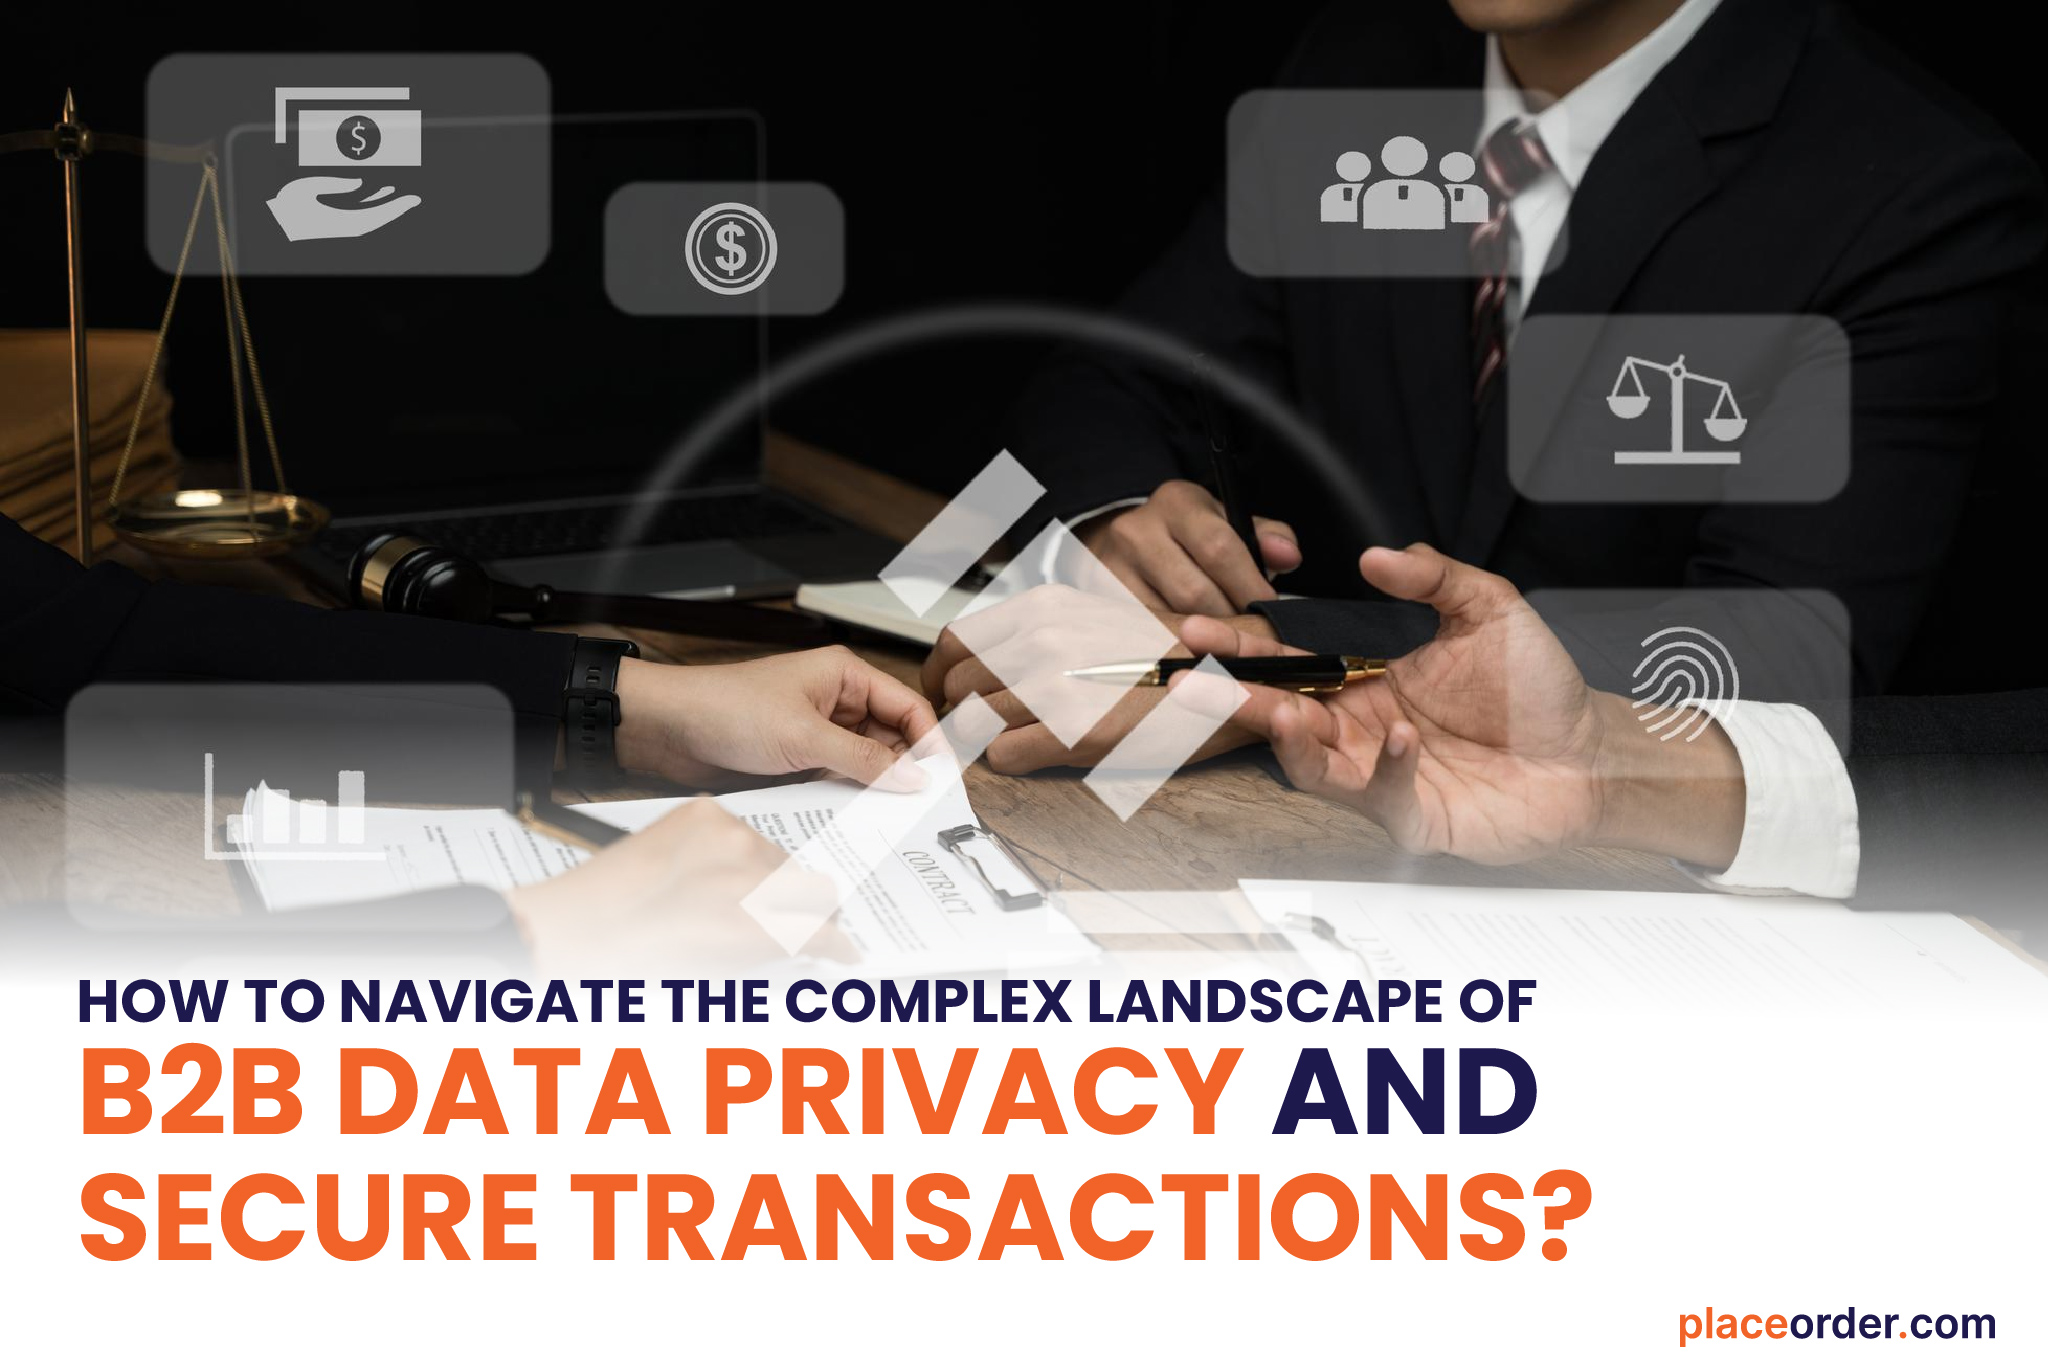 B2B Data Privacy and Secure Transactions